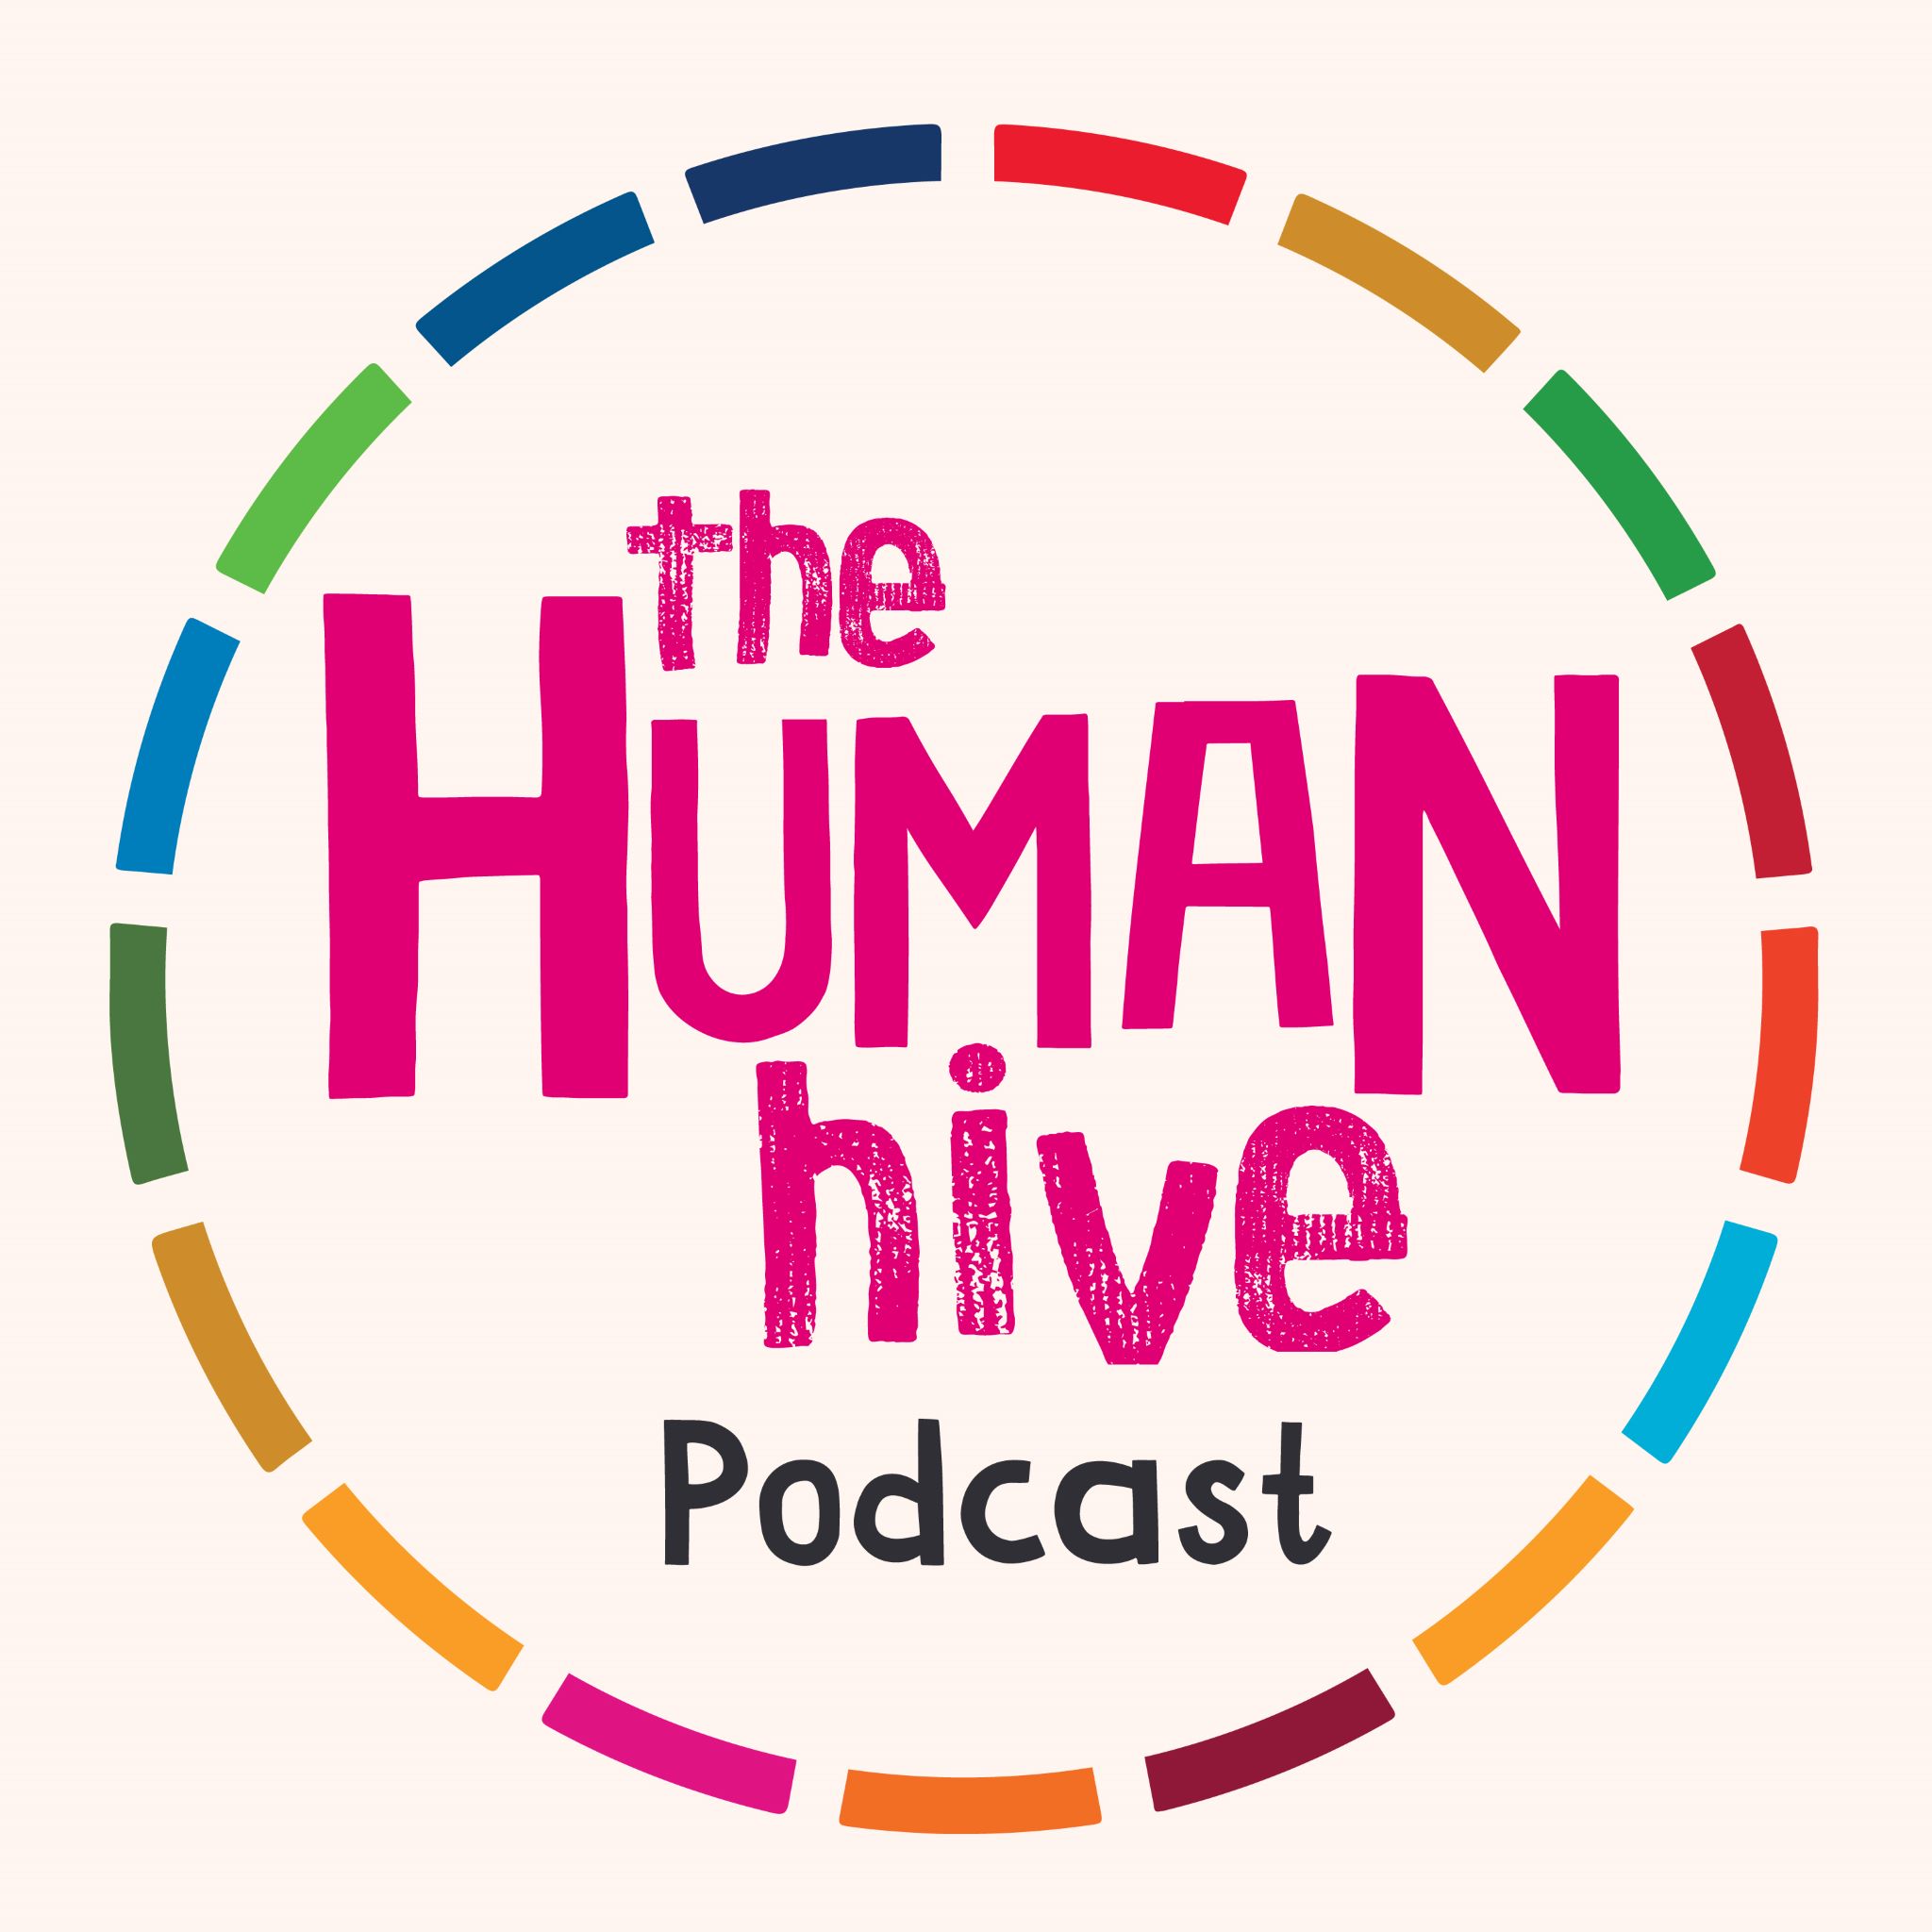 Artwork for The Human Hive